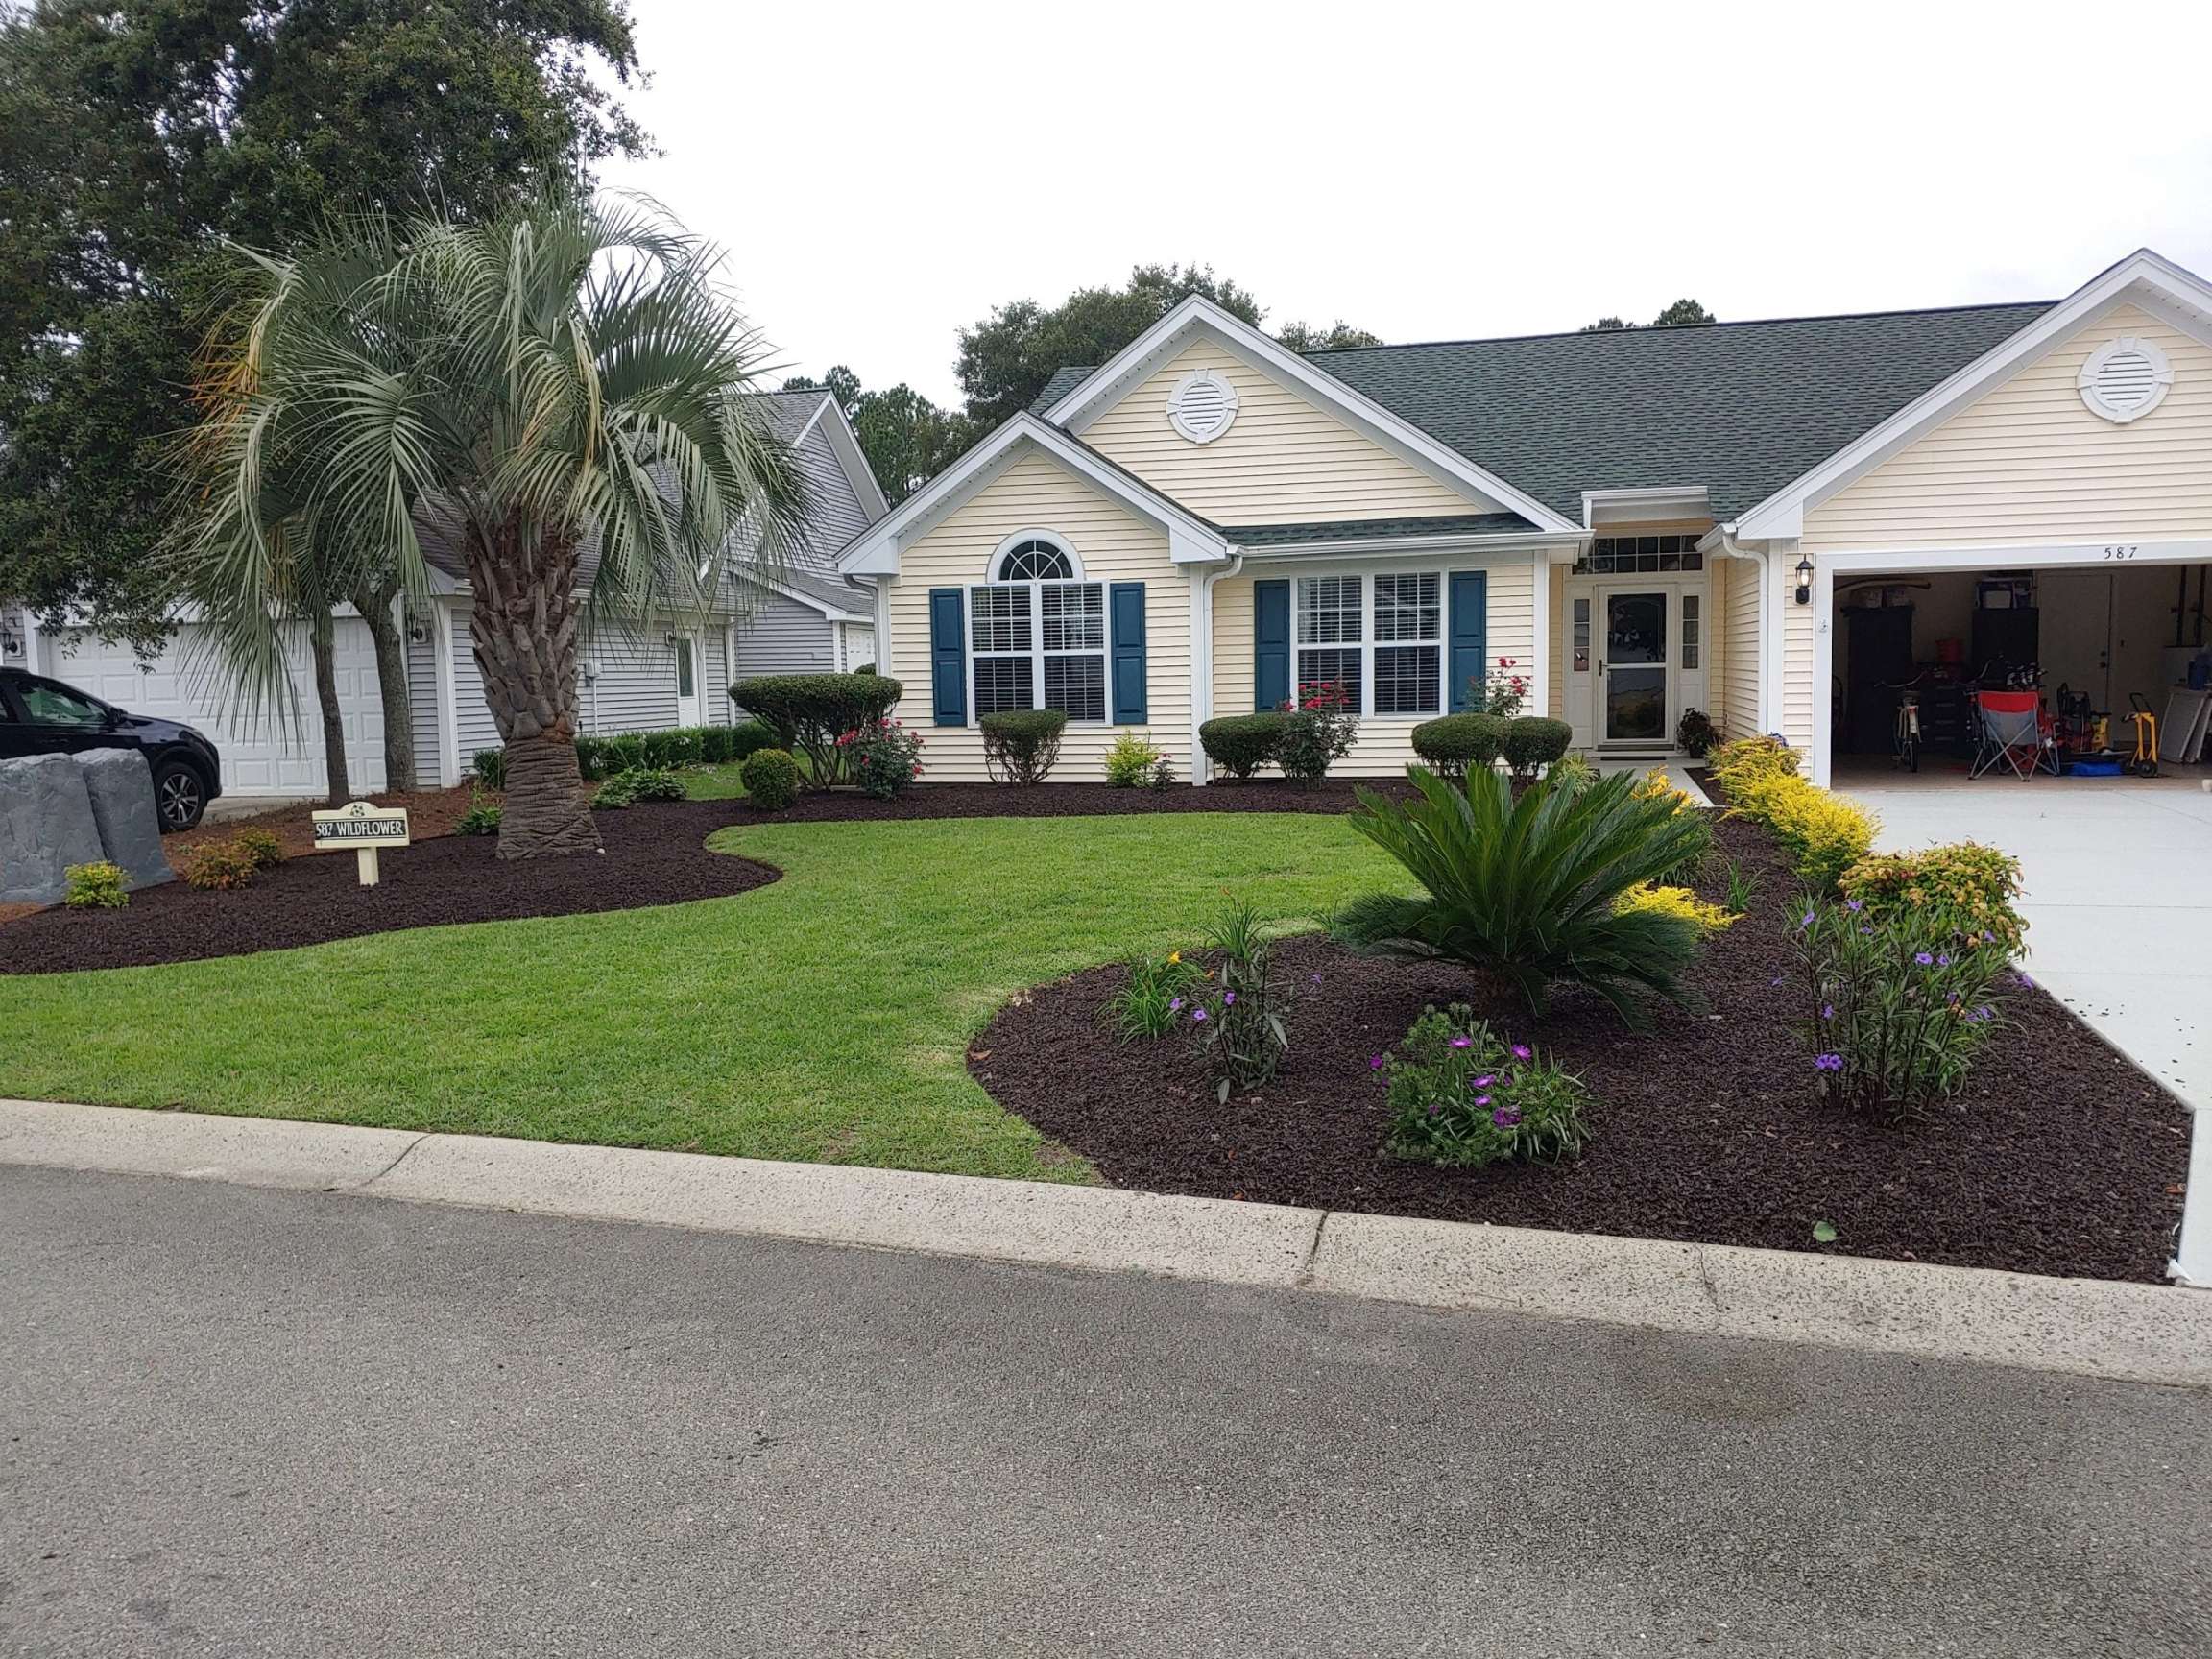 The Advantages Of Using Rubber Mulch On Landscaping Projects